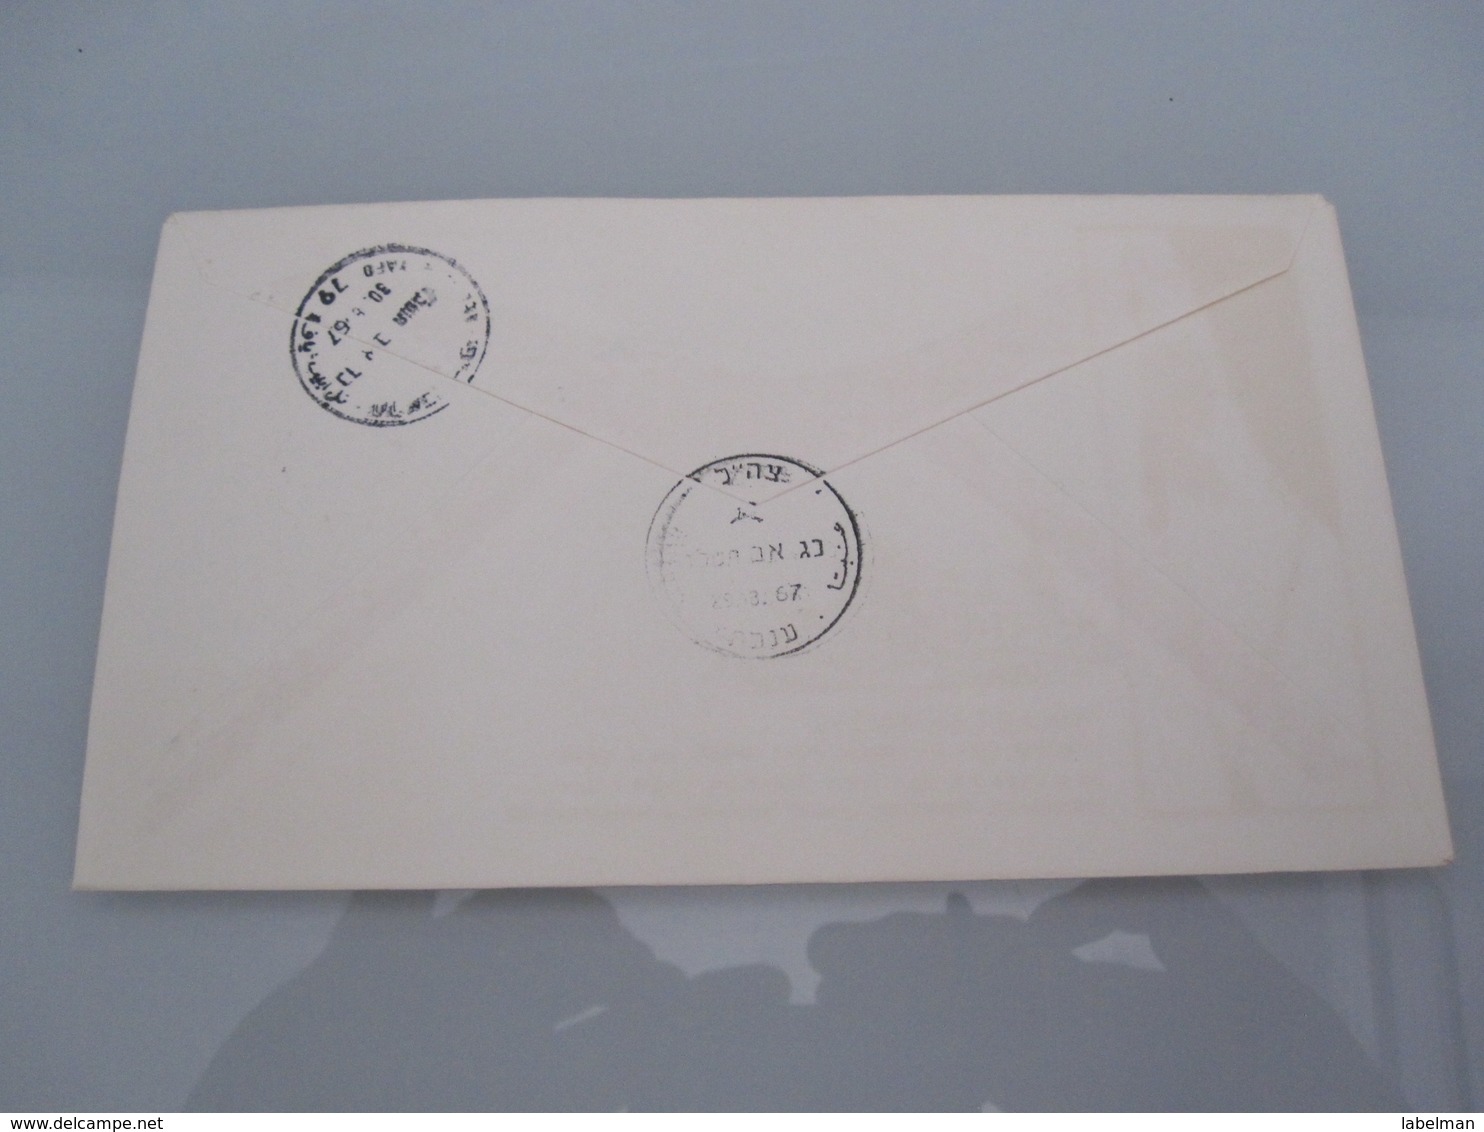 1967 POO FIRST DAY POST OFFICE OPENING ANABTA JORDAN PALESTINE ISRAEL MILITARY ADMINISTRATION ENVELOPE COVER CACHET MAP - Covers & Documents